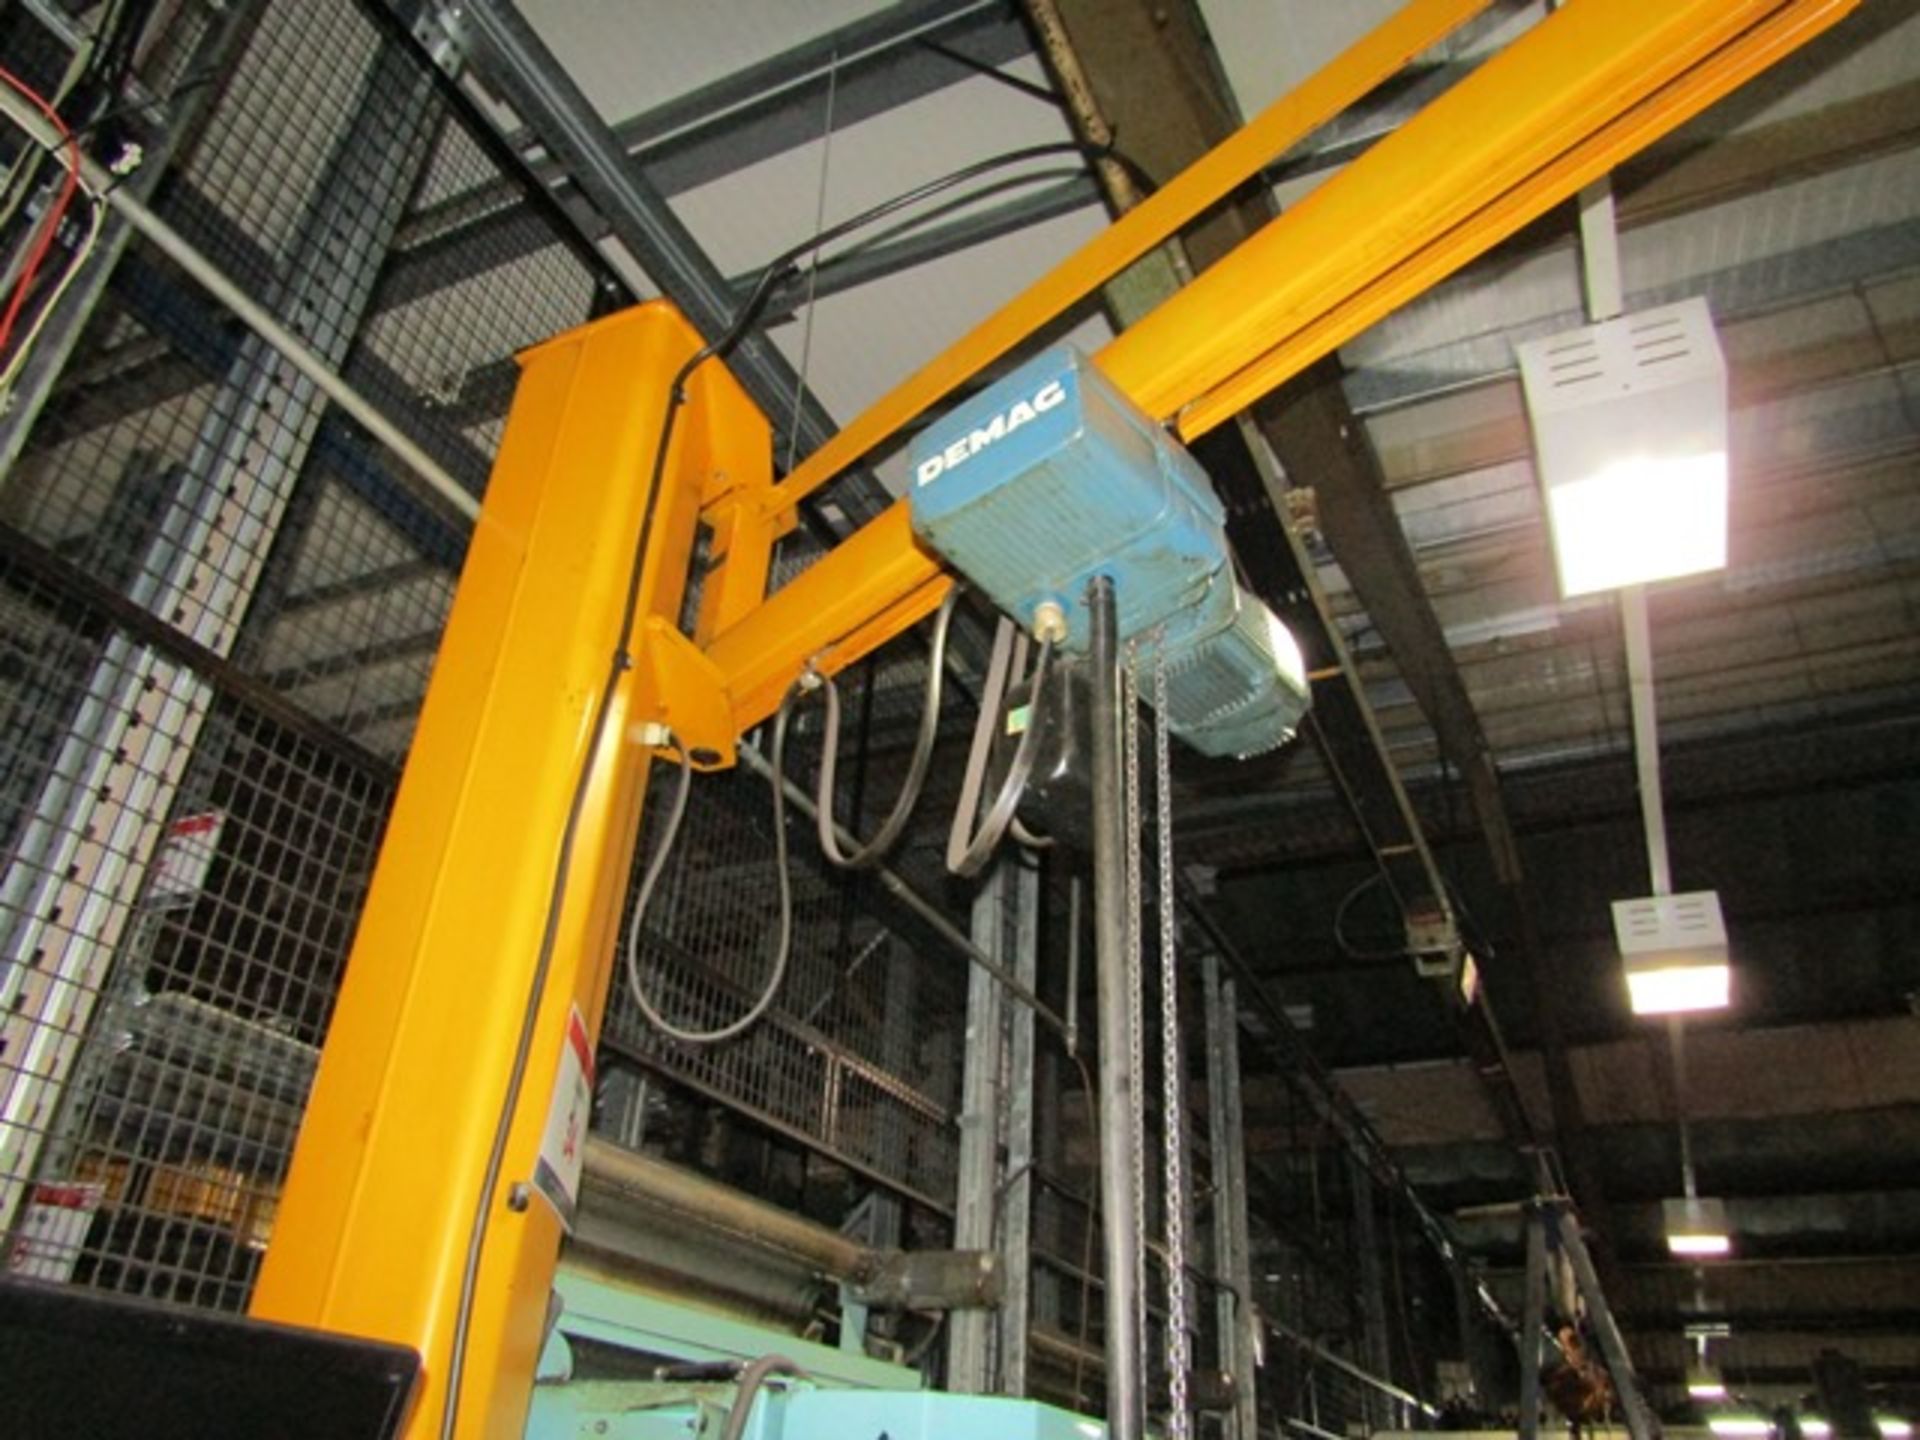 Demag 1000kg pillar jib arm crane, approx swing 3m, fitted Demag 1000kg, electric chain hoist, - Image 3 of 6